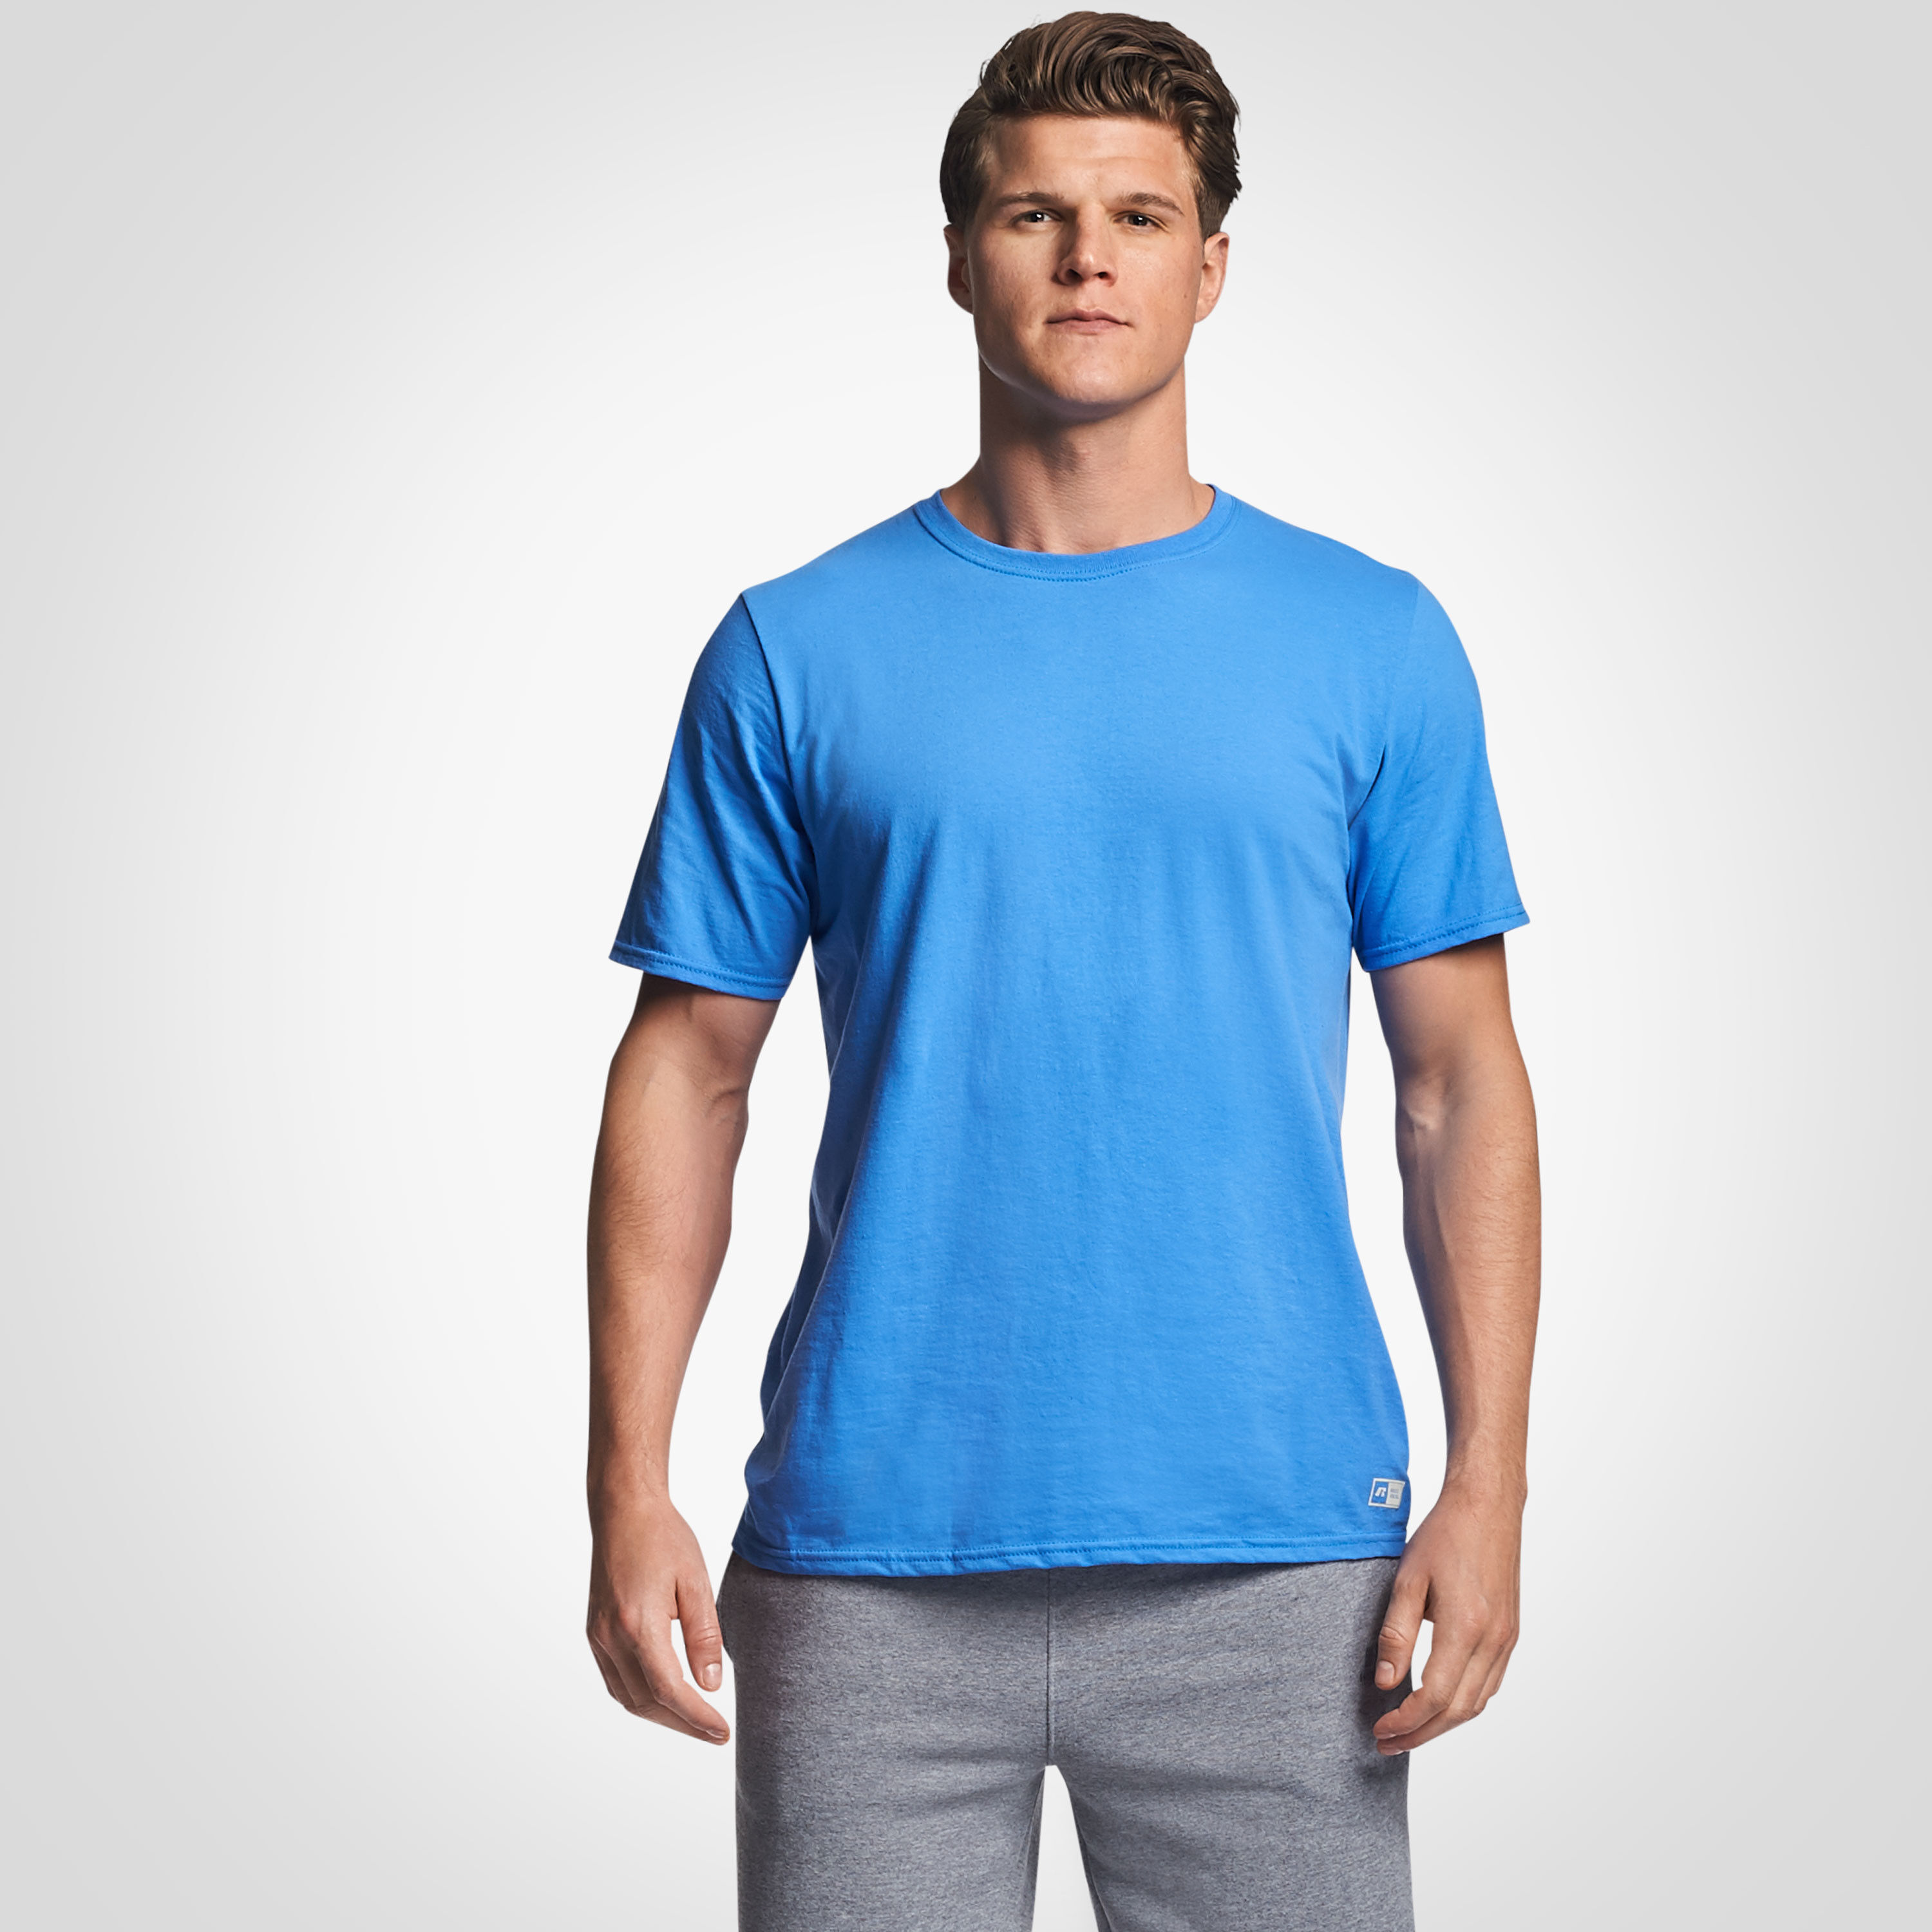 Russell T Shirt Color Chart